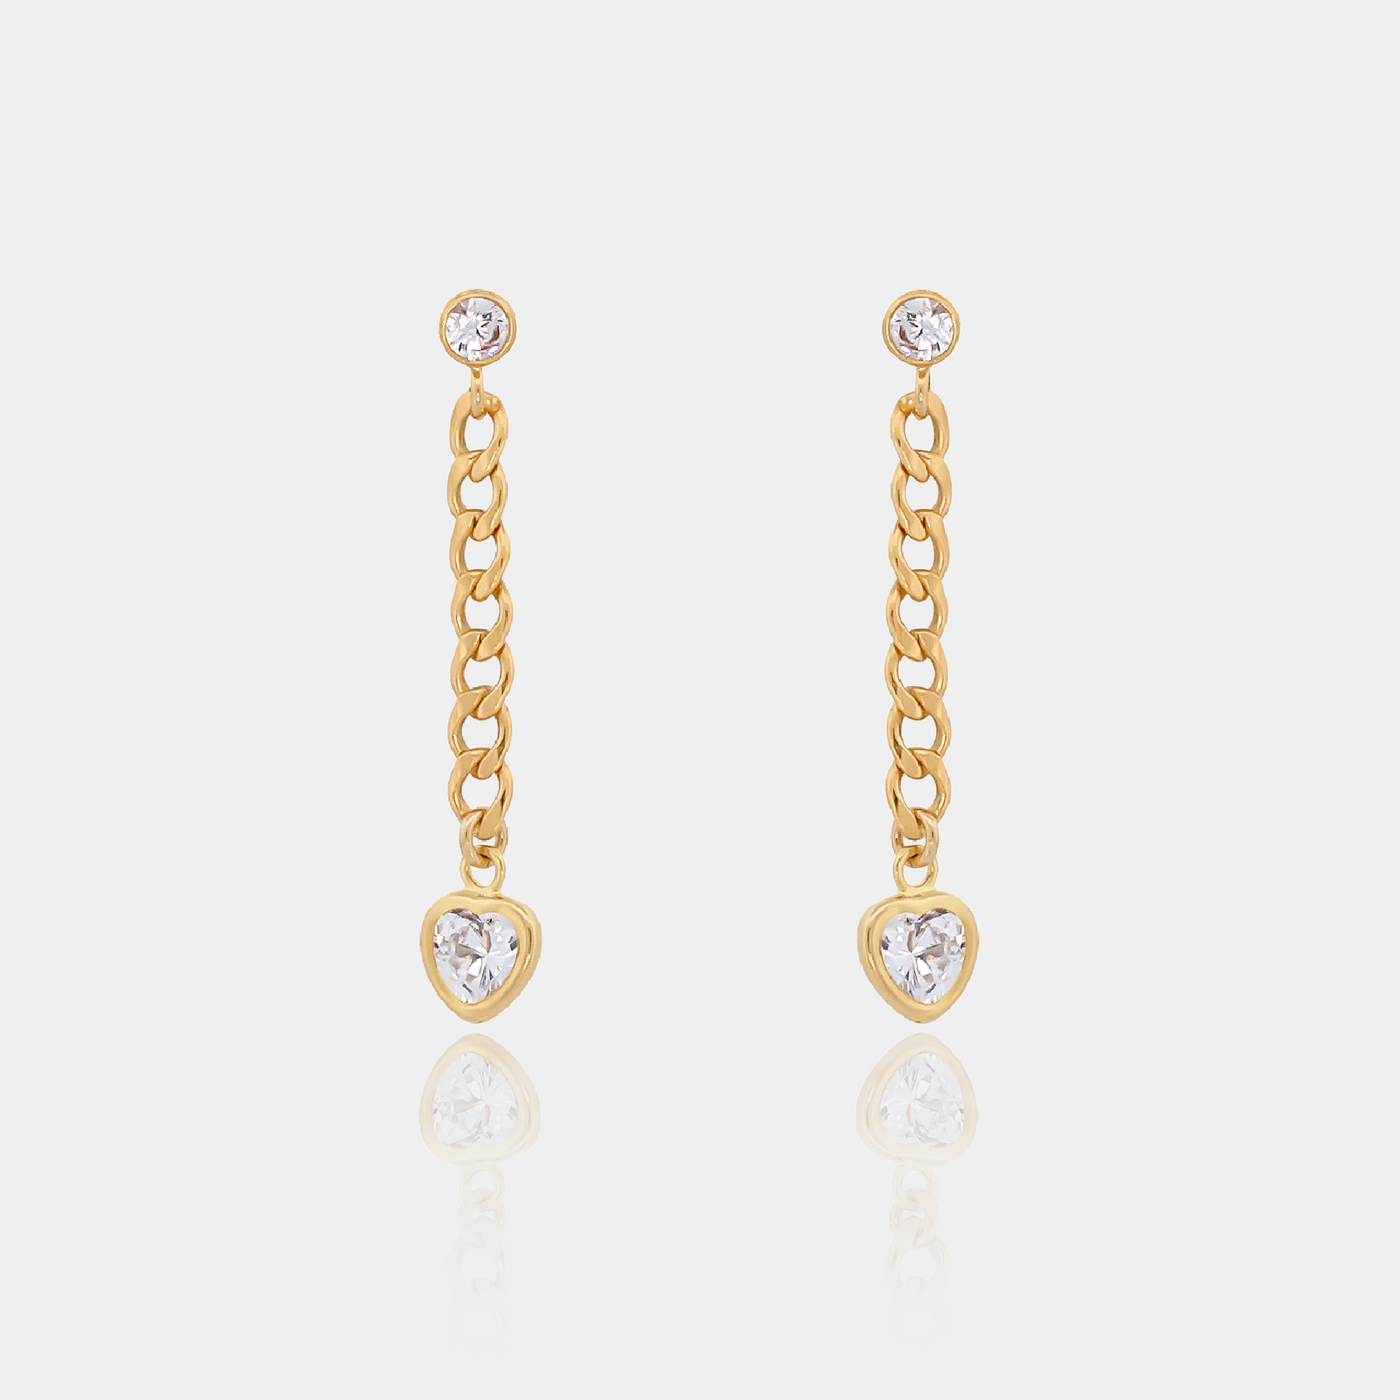 Round Cubic Zirconia Stud Earring with Hanging Curb Chain and CZ Heart Drop Charm Earring